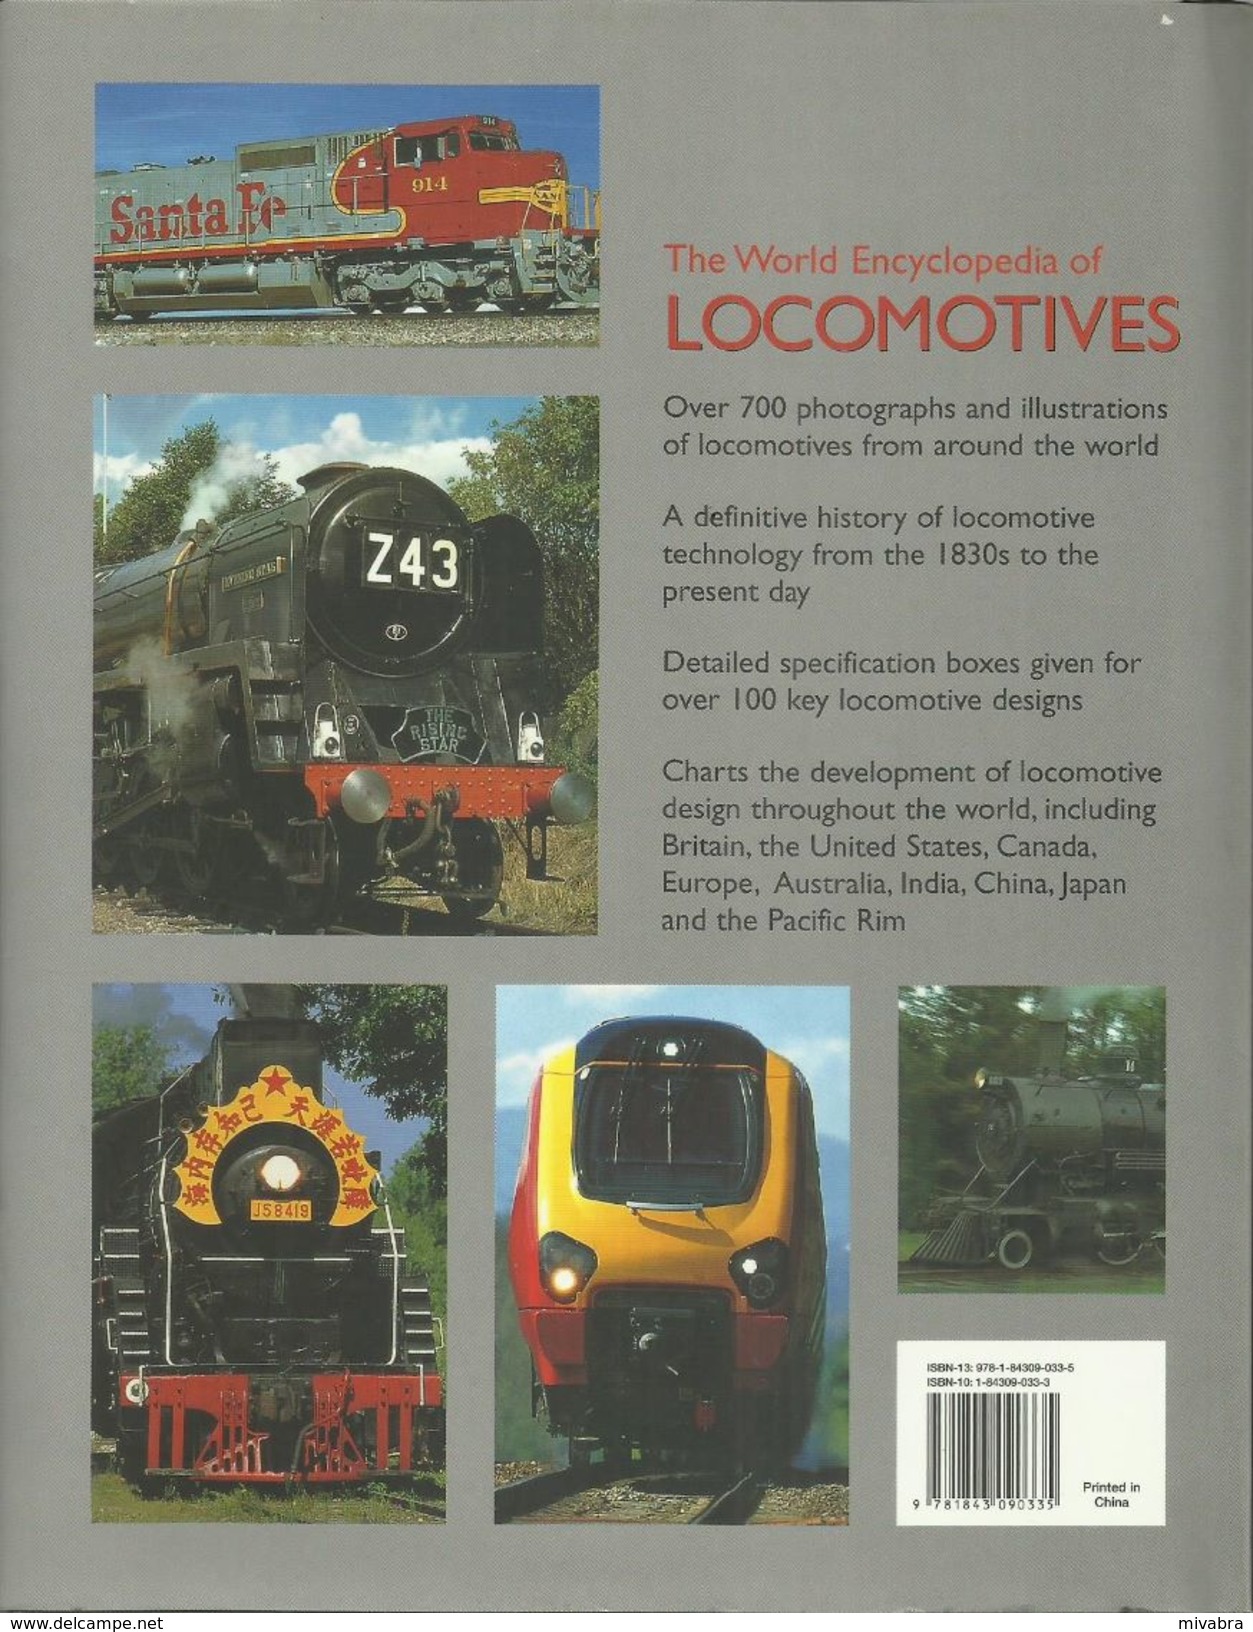 THE WORLD ENCYCLOPEDIA OF LOCOMOTIVES - AN INTERNATIONAL GUIDE TO THE MOST FABULOUS TRAIN ENGINES - COLIN GARRATT - Transports